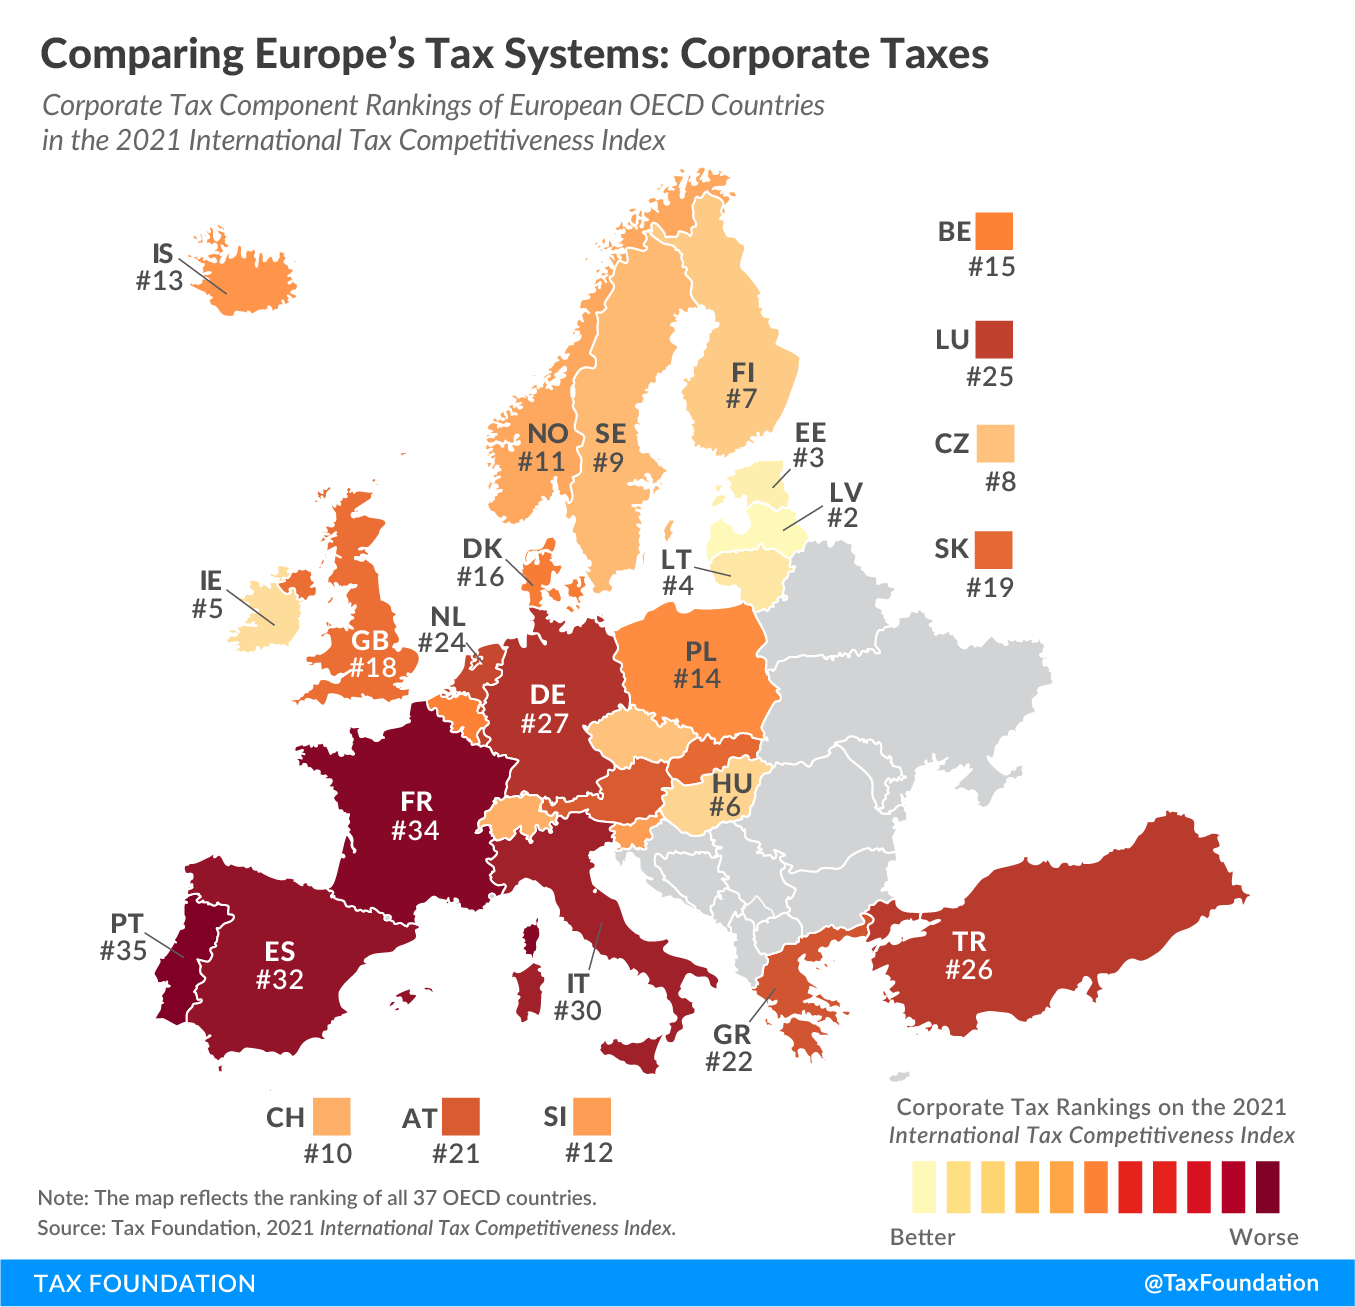 Comparing Corporate Tax Systems in Europe 2021 Worst Corporate Tax Systems in Europe 2021